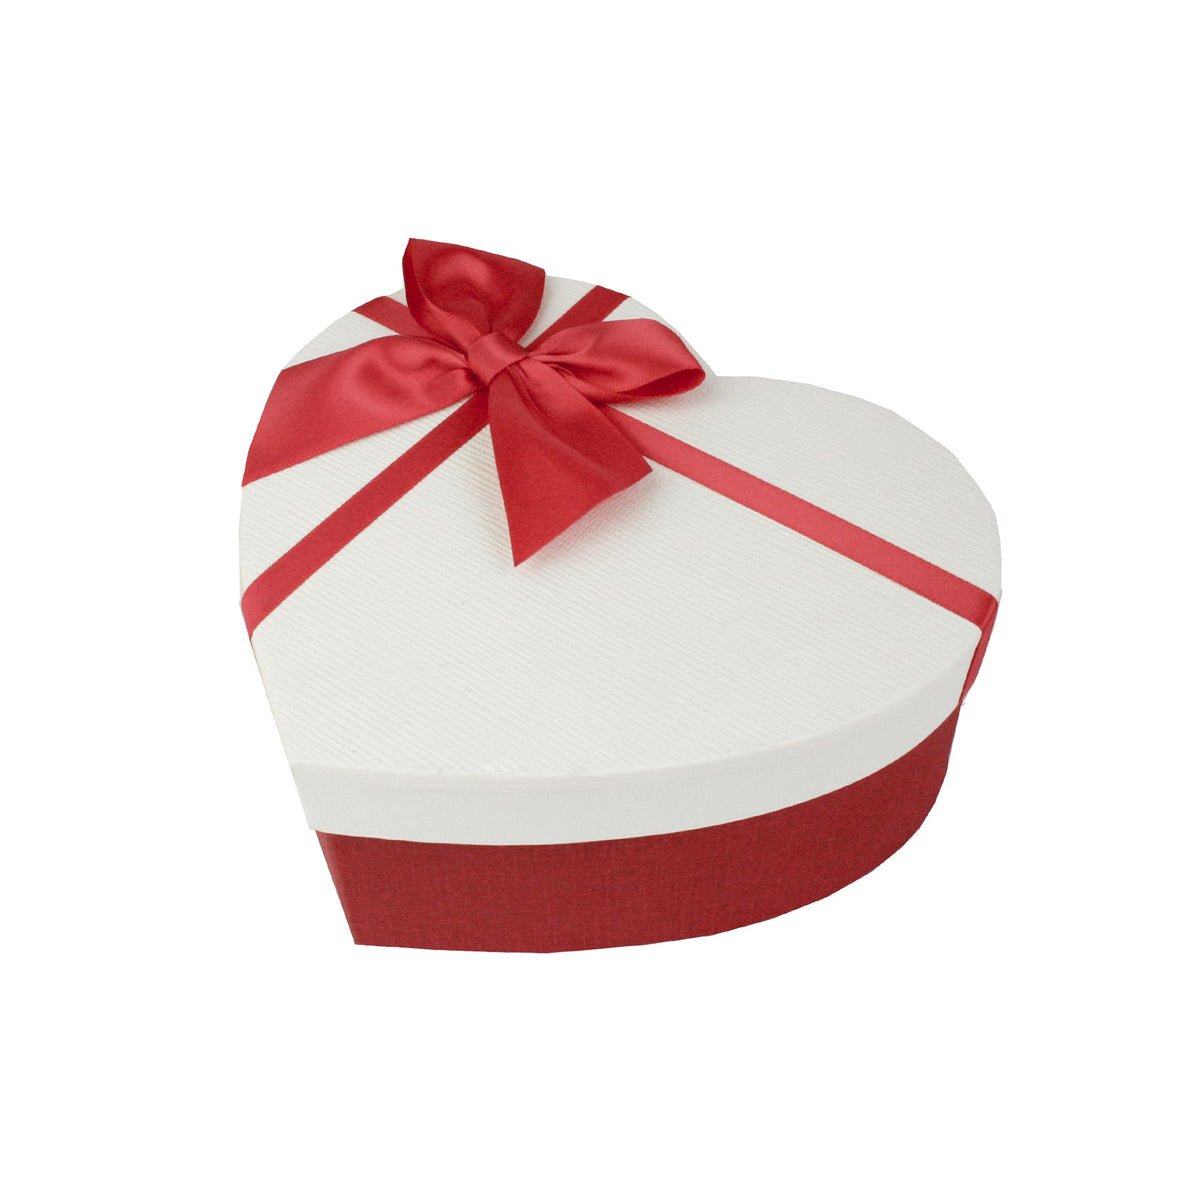 Luxury Heart Shaped Red/White Gift Box - Single (Sizes Available)